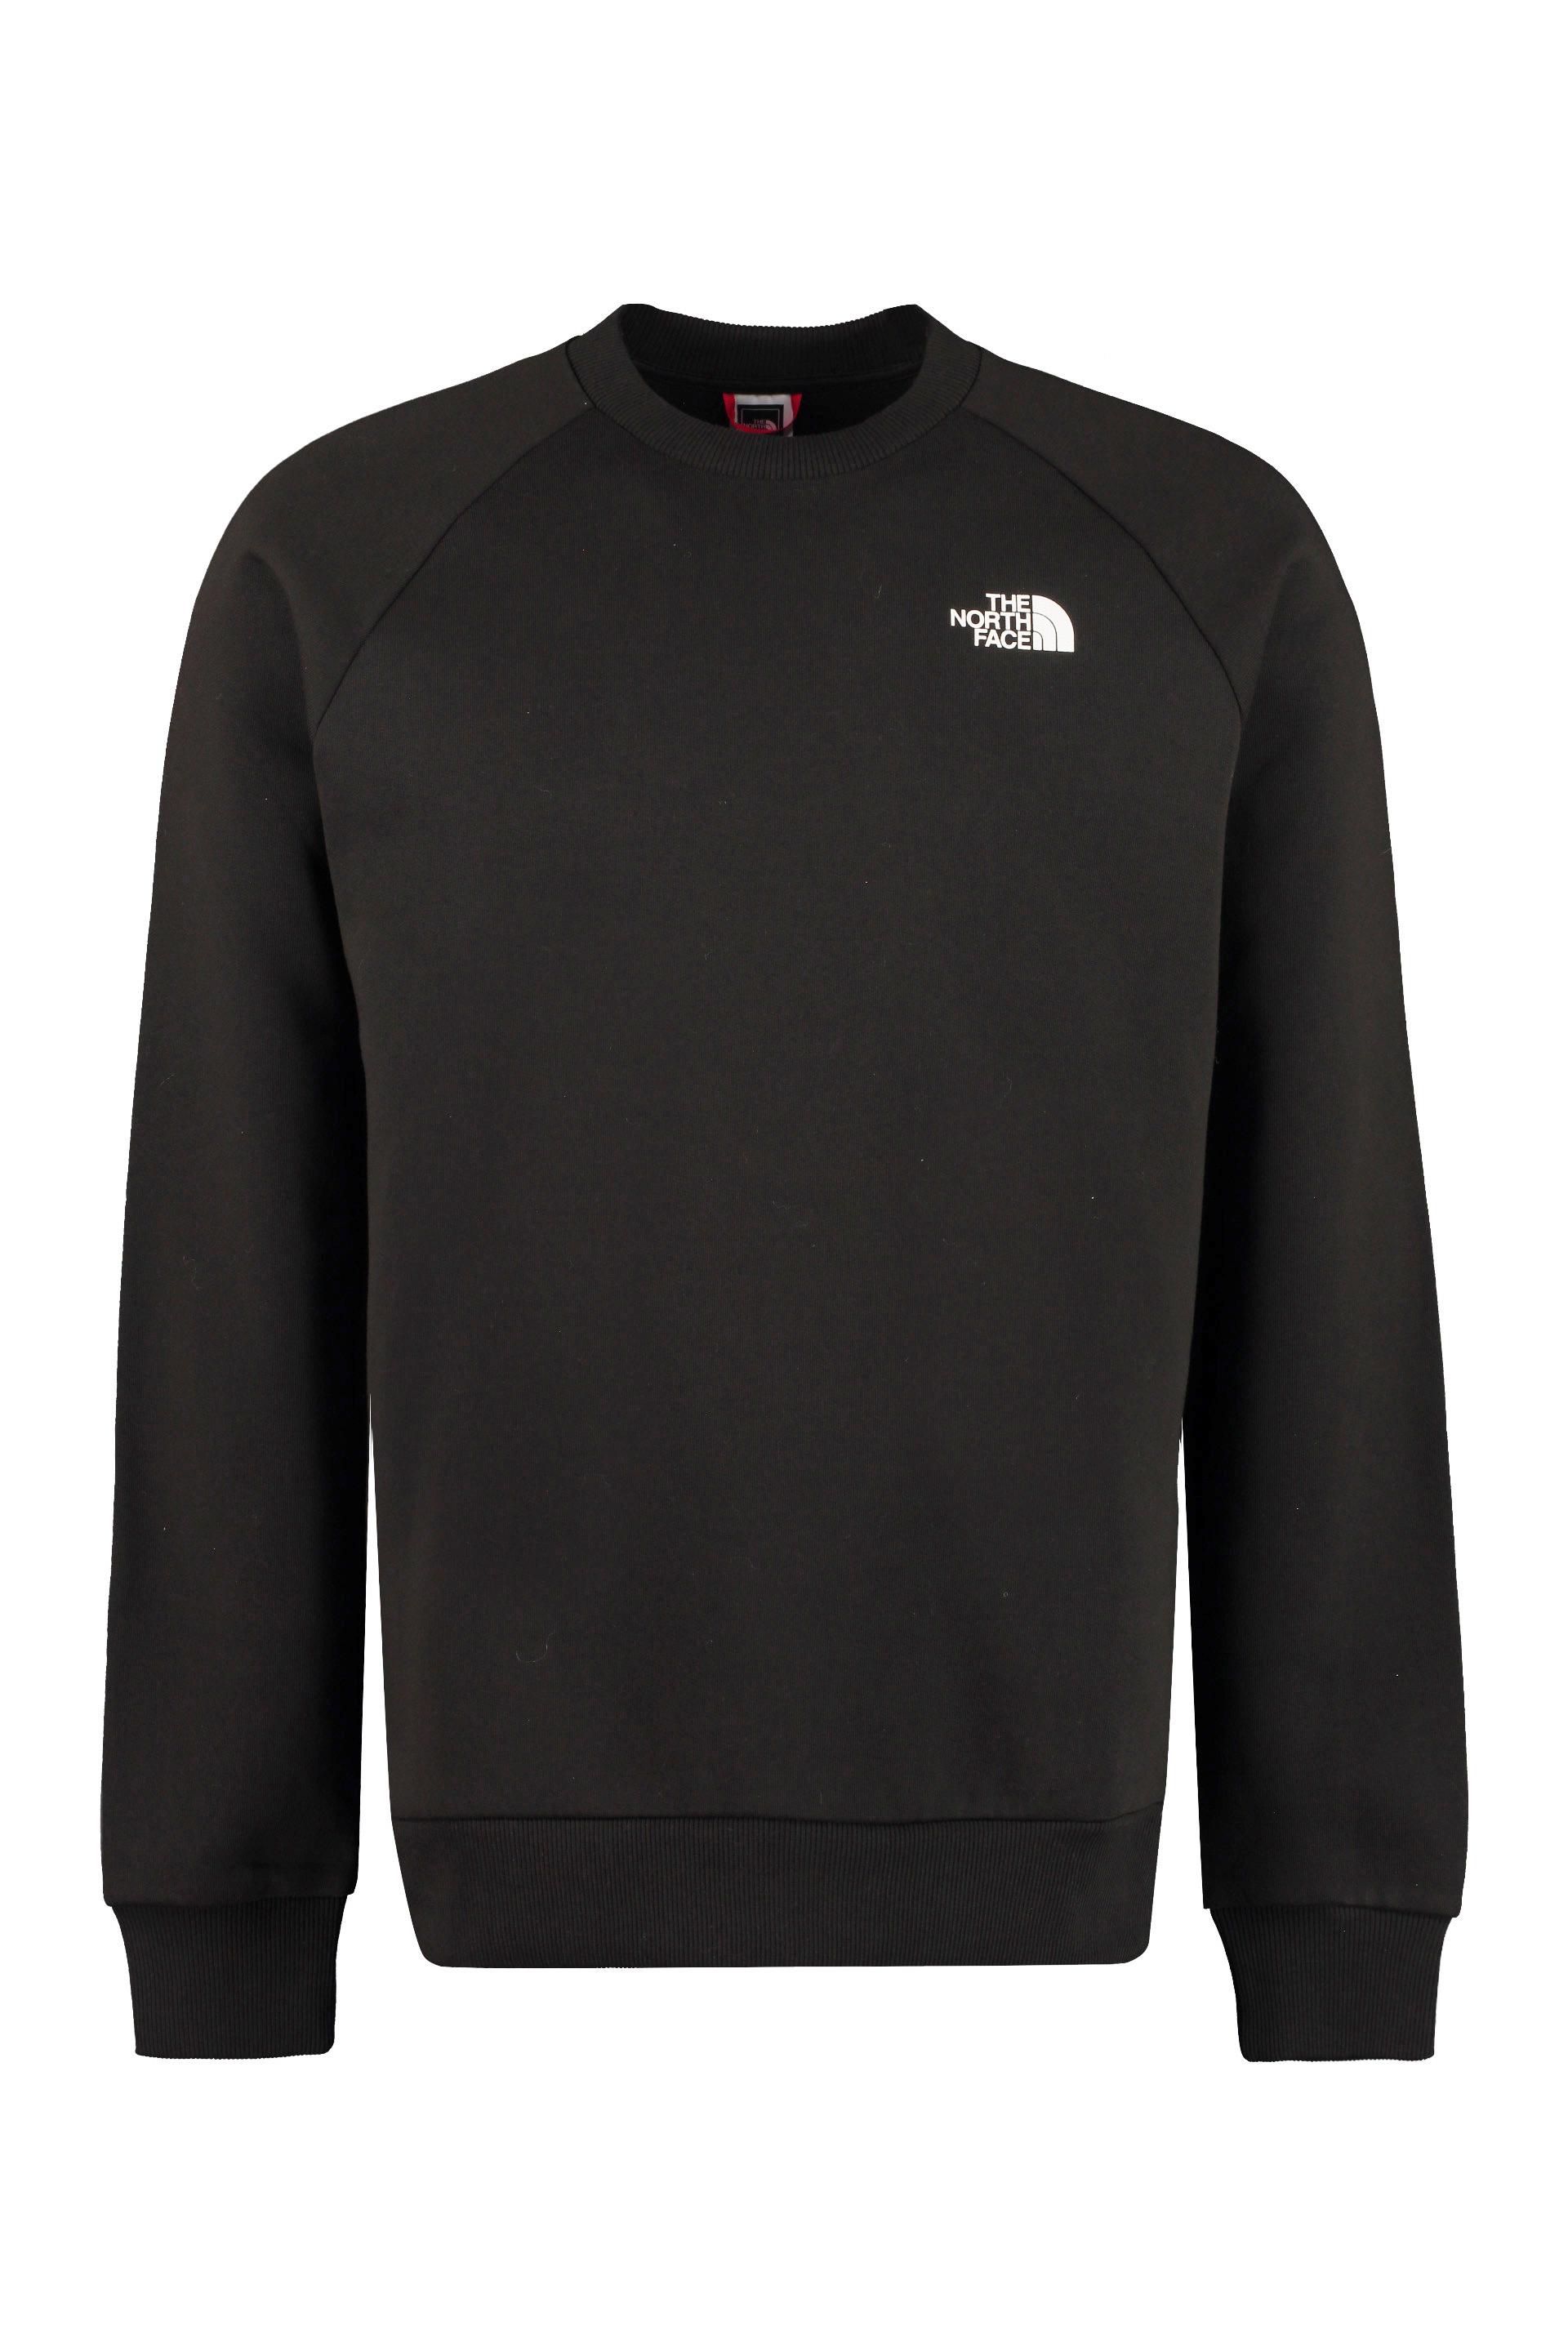 The North Face Cotton Crew-neck Sweatshirt in Black for Men - Lyst